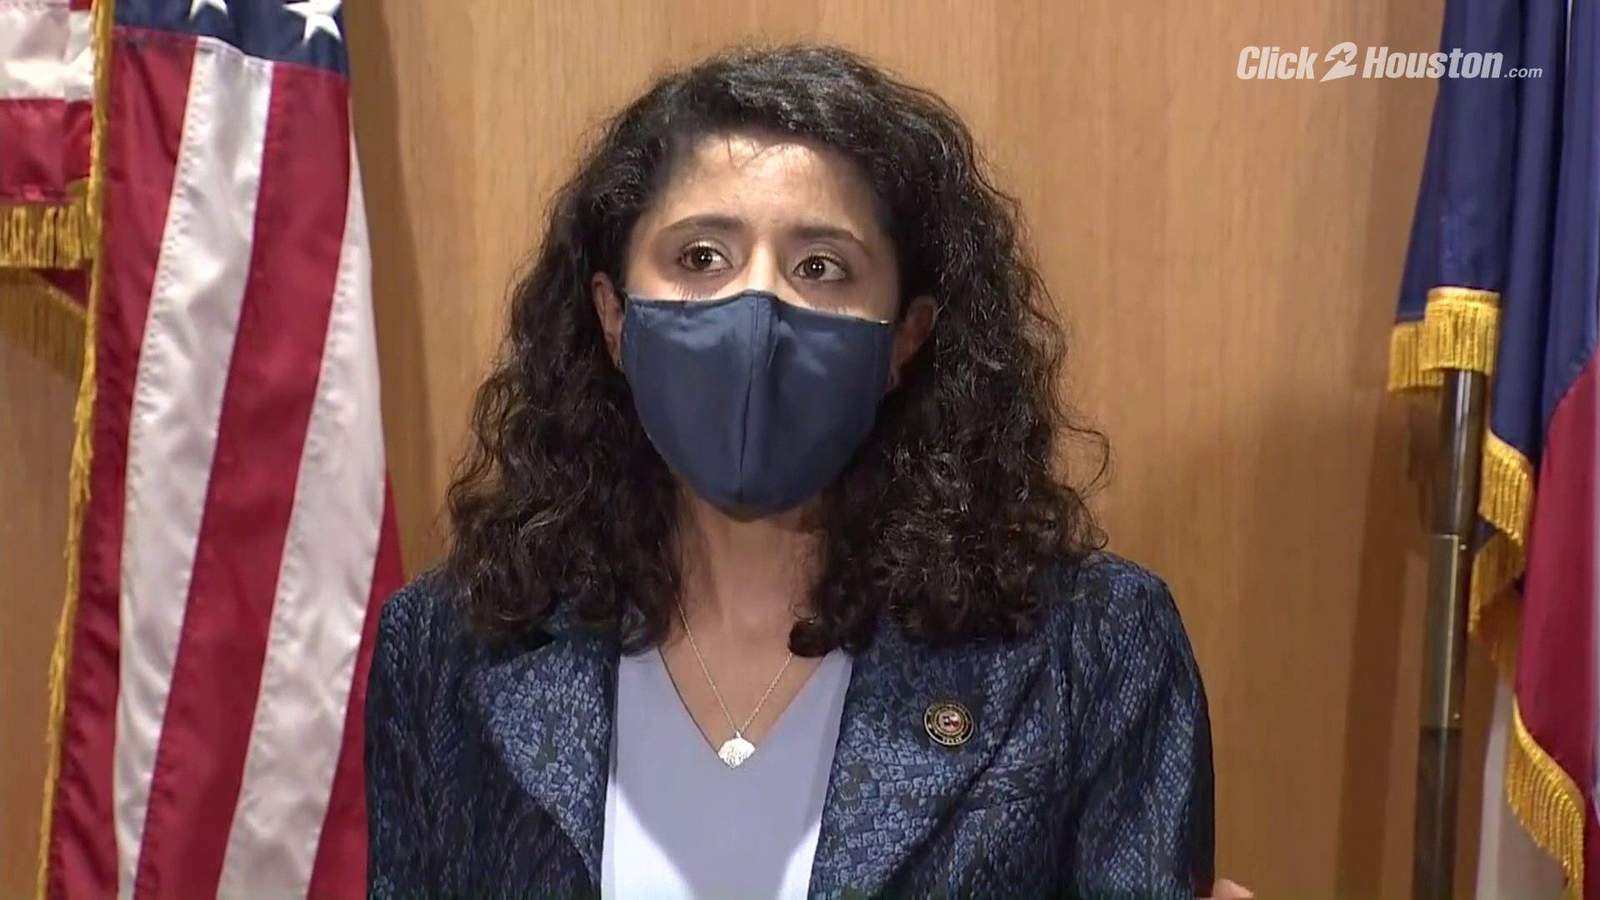 Harris County Judge Lina Hidalgo discusses advertising campaign aimed at COVID-19 vaccine fears